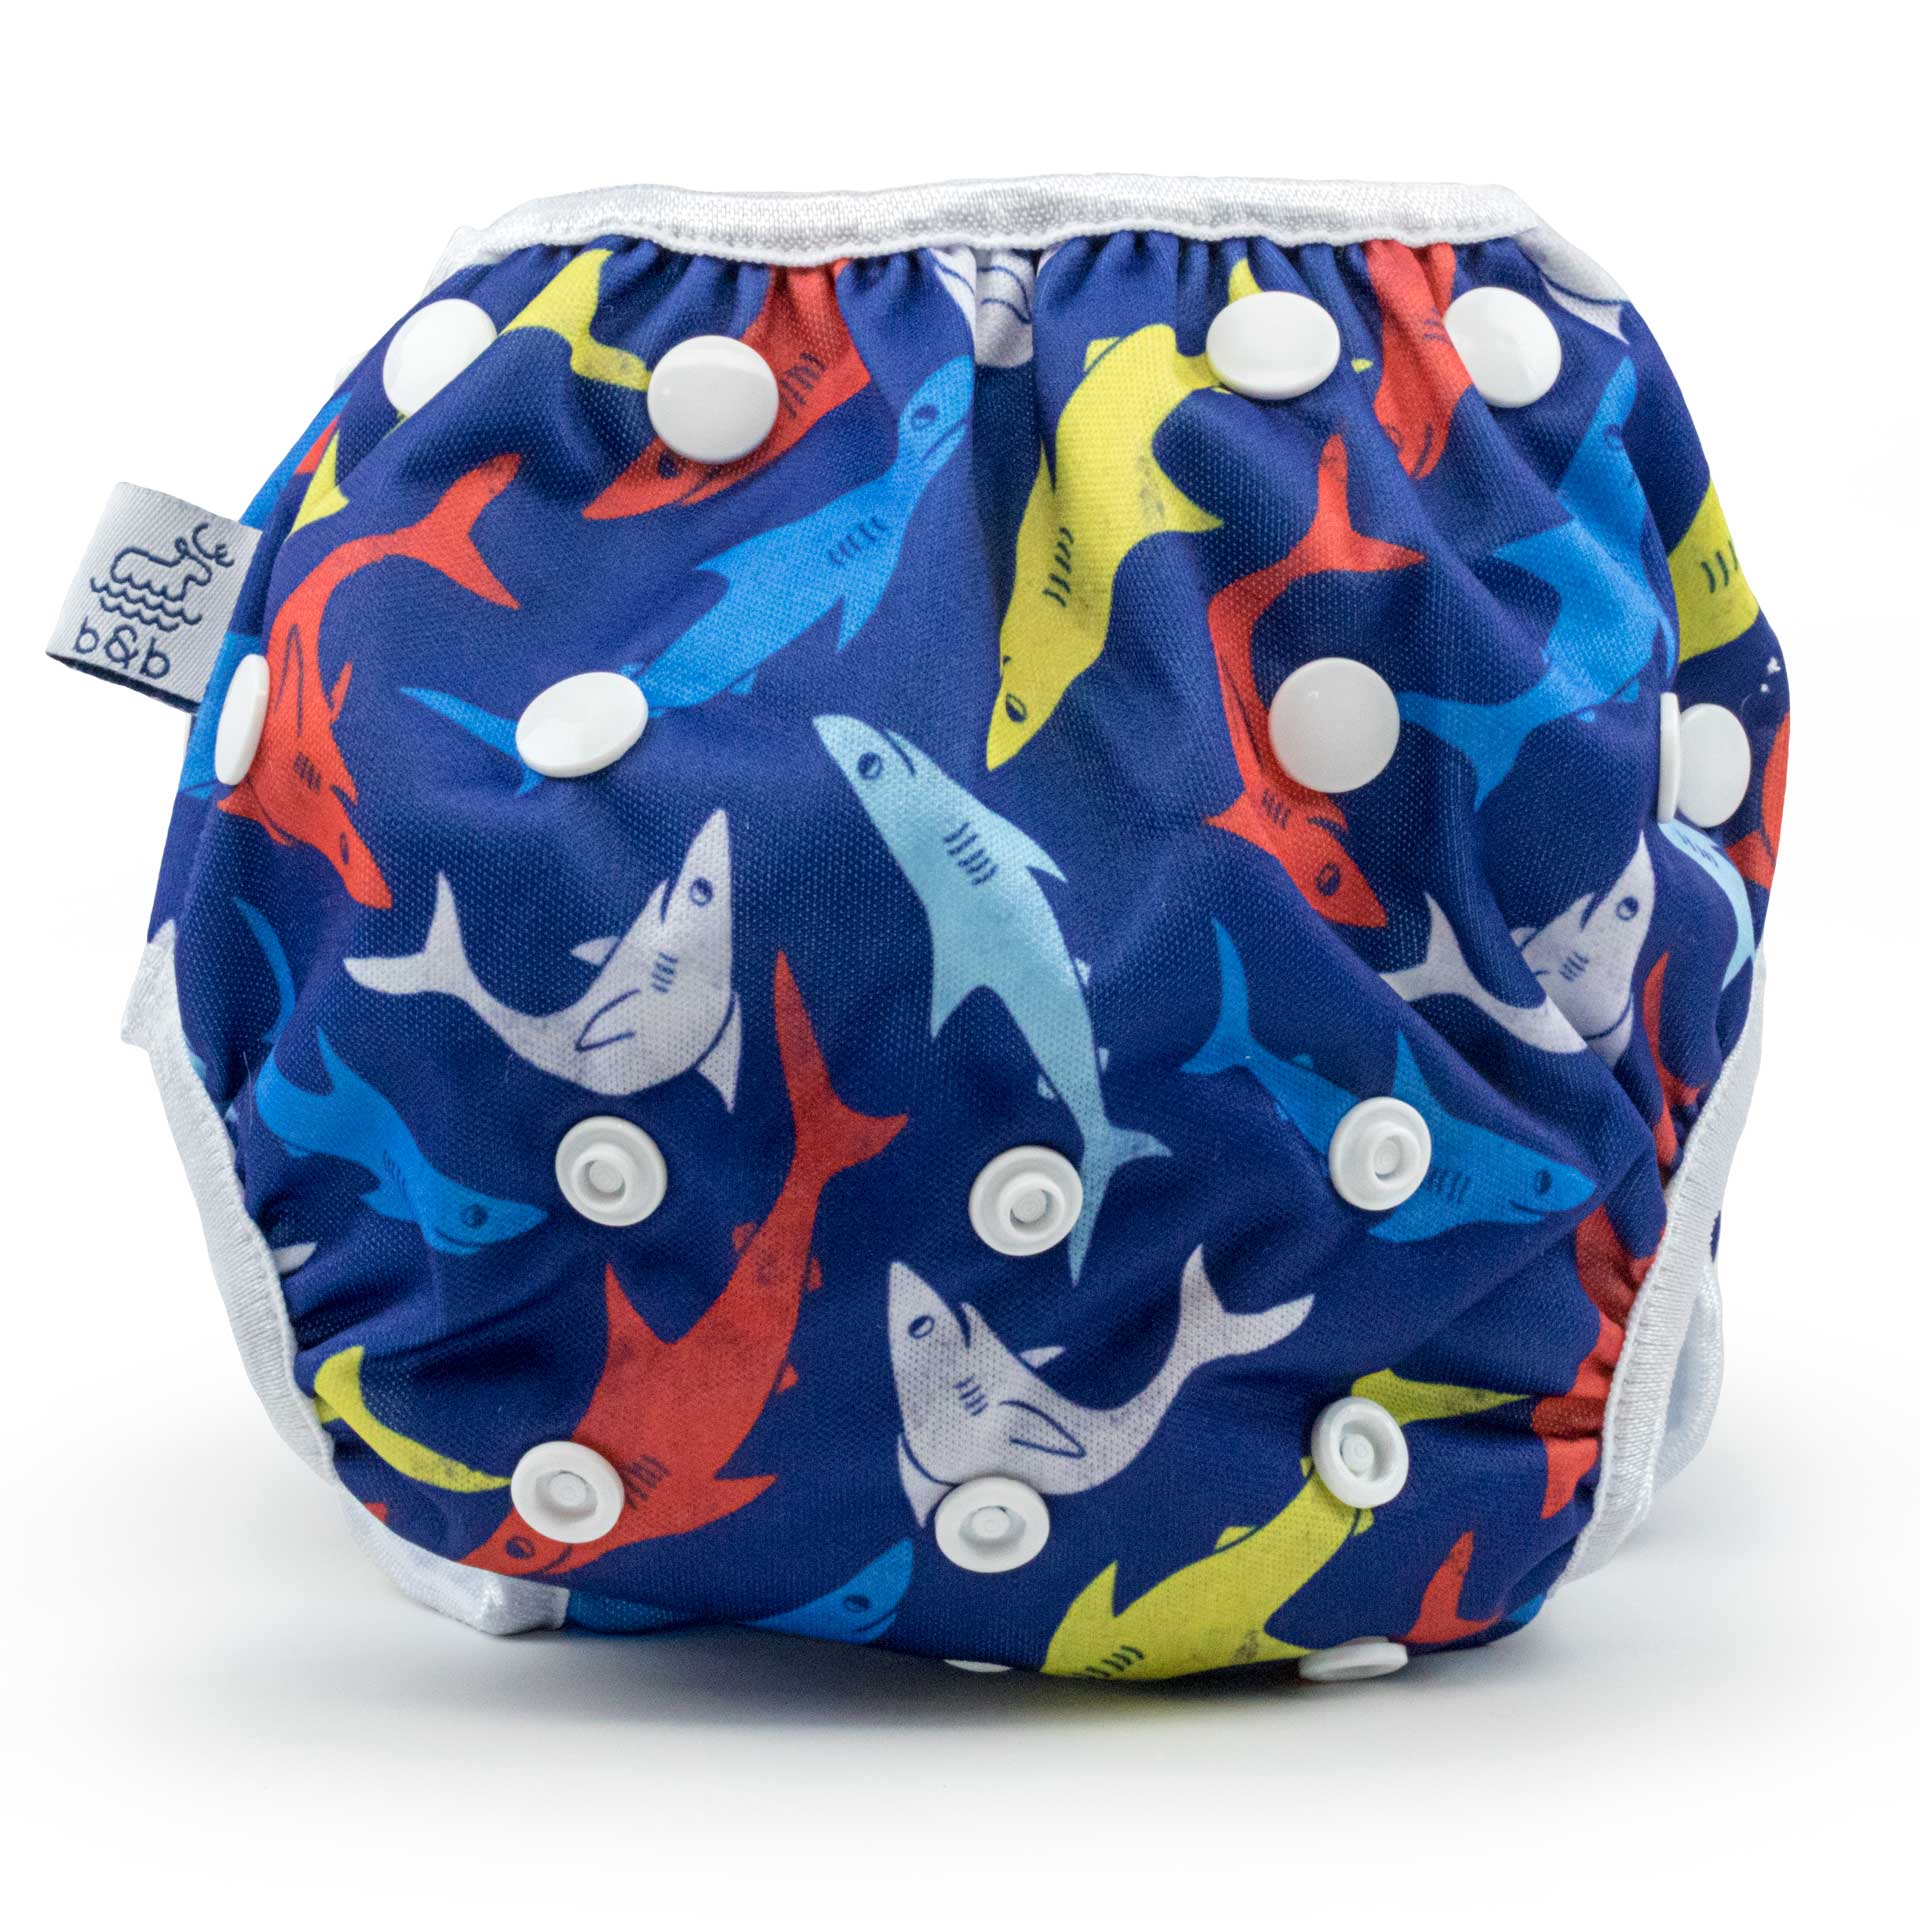 the swimming starter kit boys swim bottom with diaper included in a blue colorful shark pattern